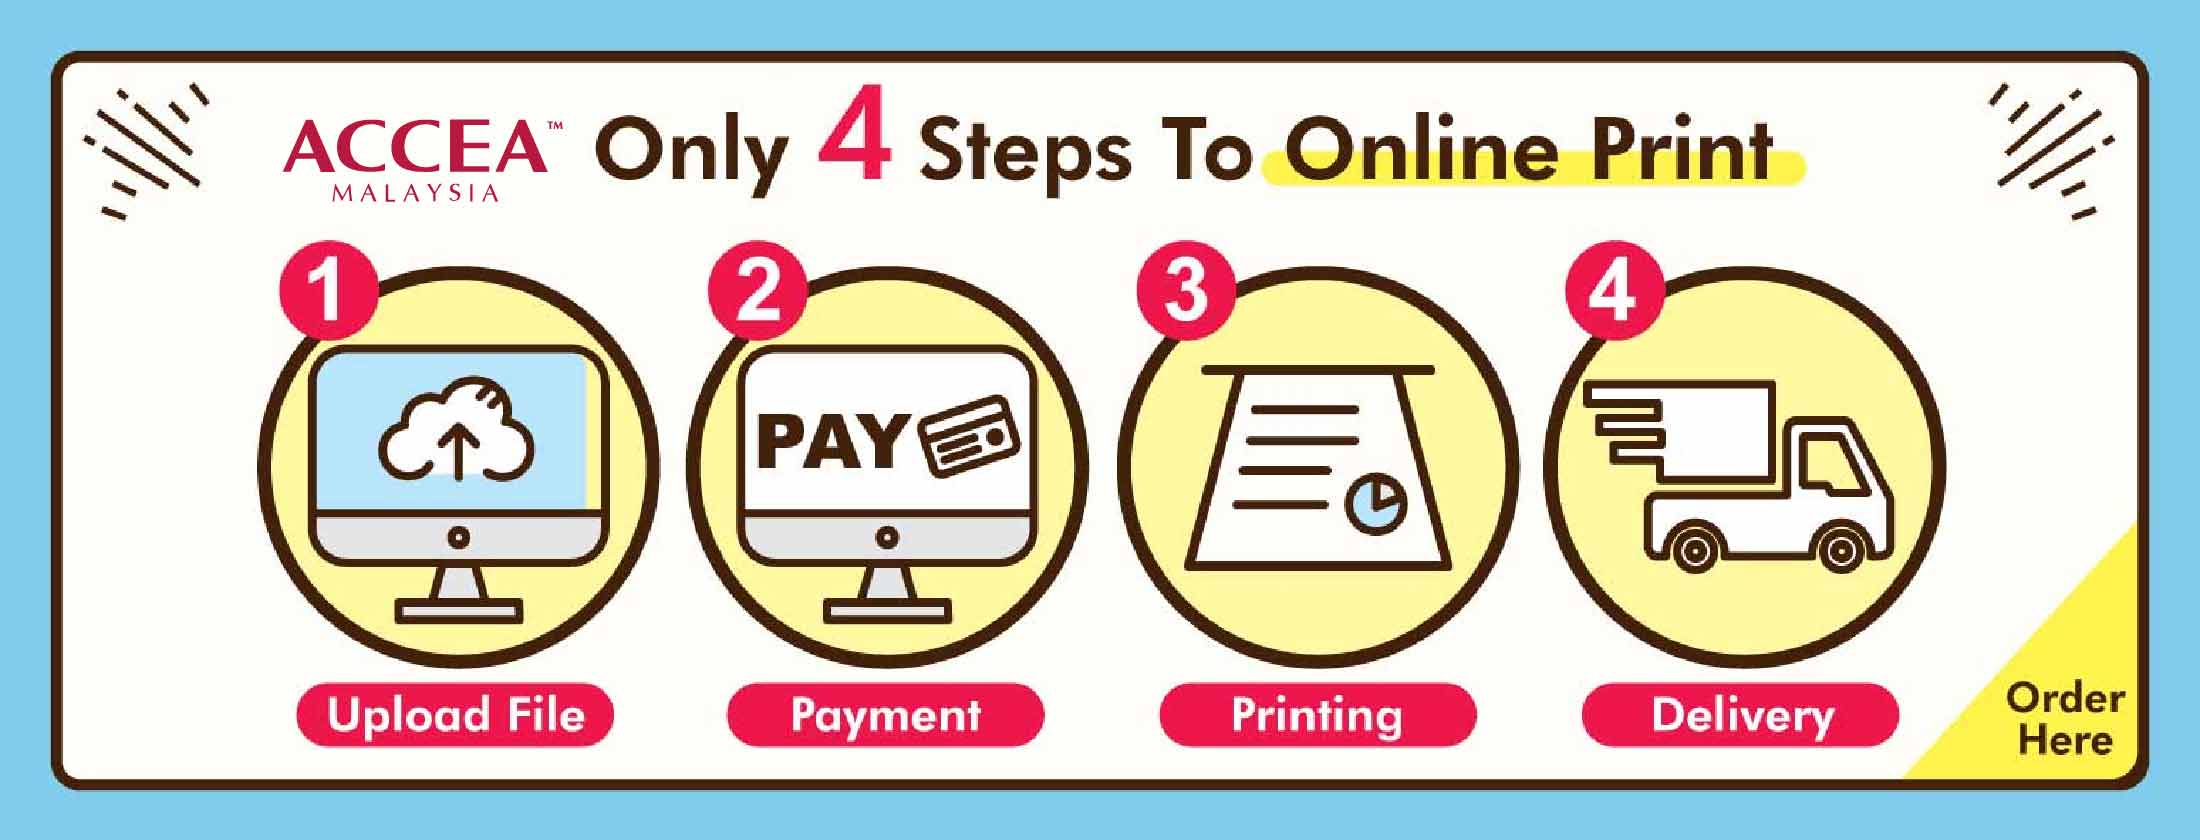 Only 4 Steps To Online Print